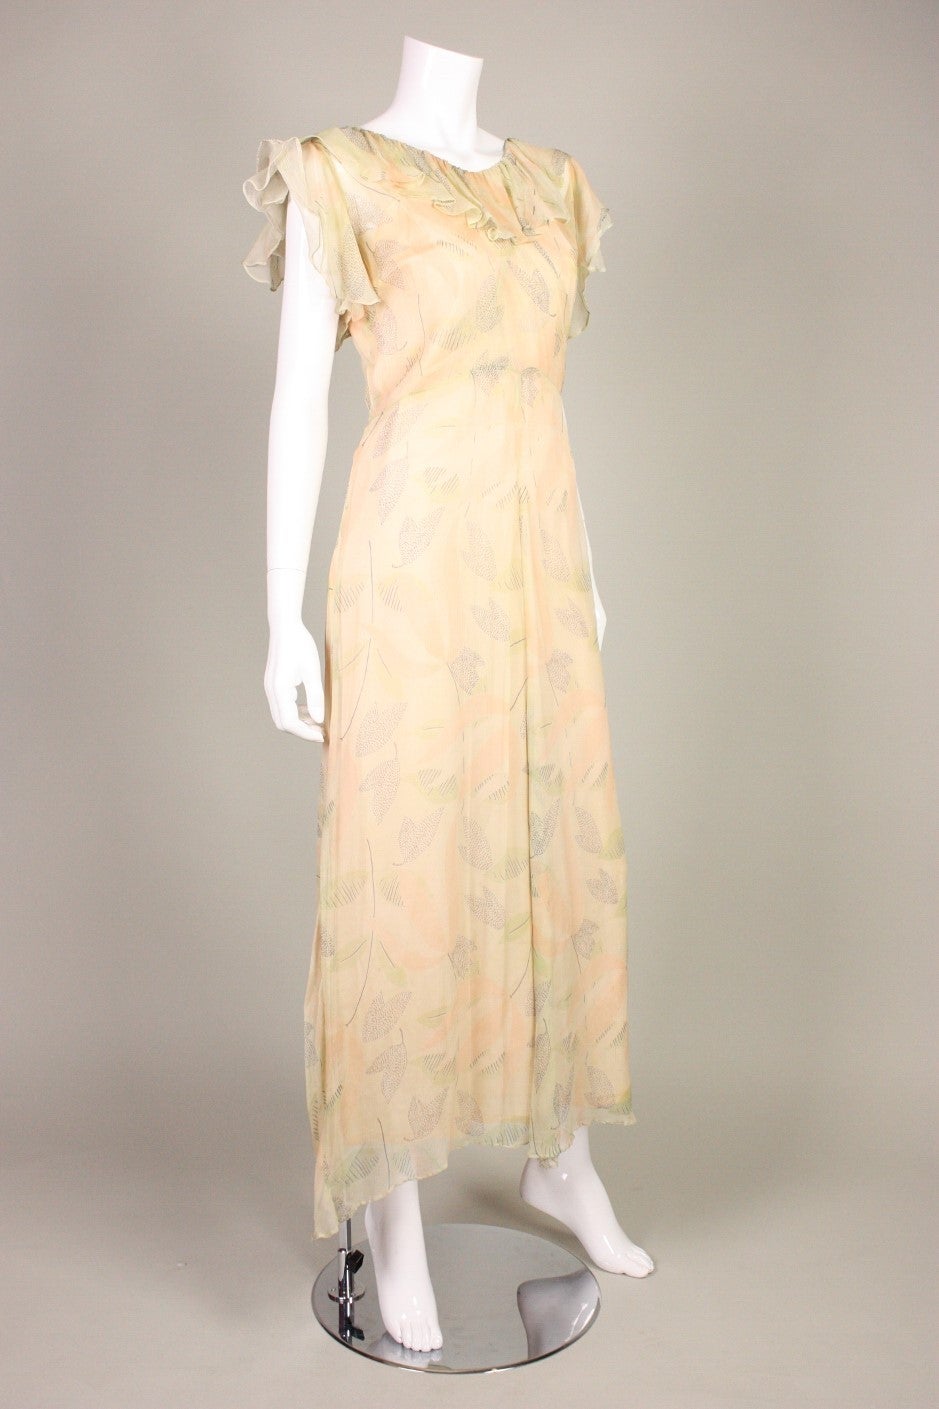 Vintage dress dates to the 1930's and features an Art Deco geometric floral print.  It is made of peach chiffon with a ruffled neckline and flounce sleeve with organza to stiffen.  Side snap closure.  Unlined, but comes with a slip of a similar